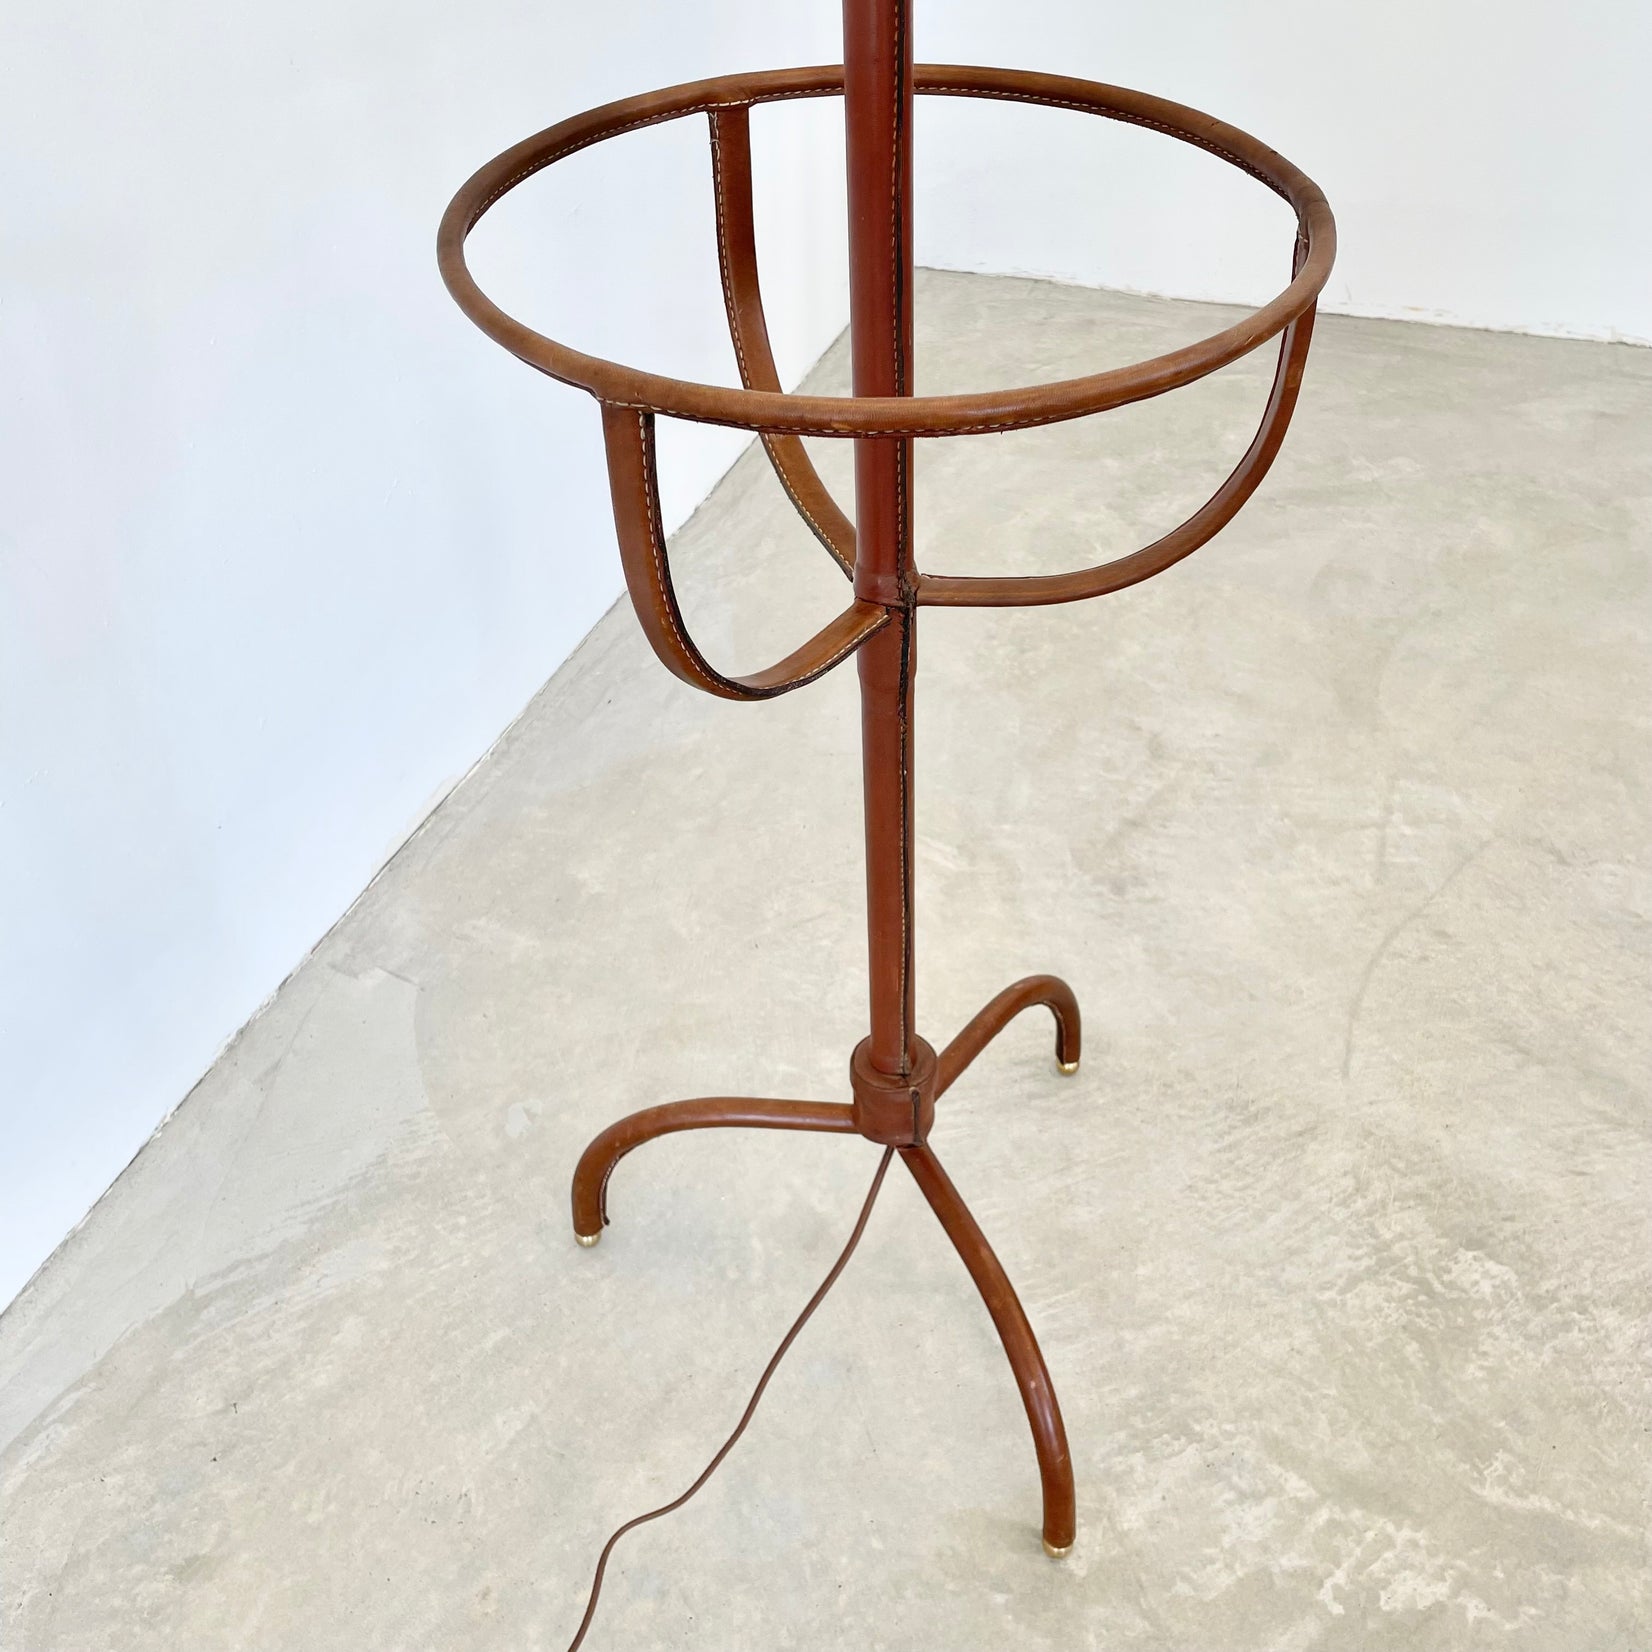 Jacques Adnet Floor Lamp in Saddle Leather, 1950s France